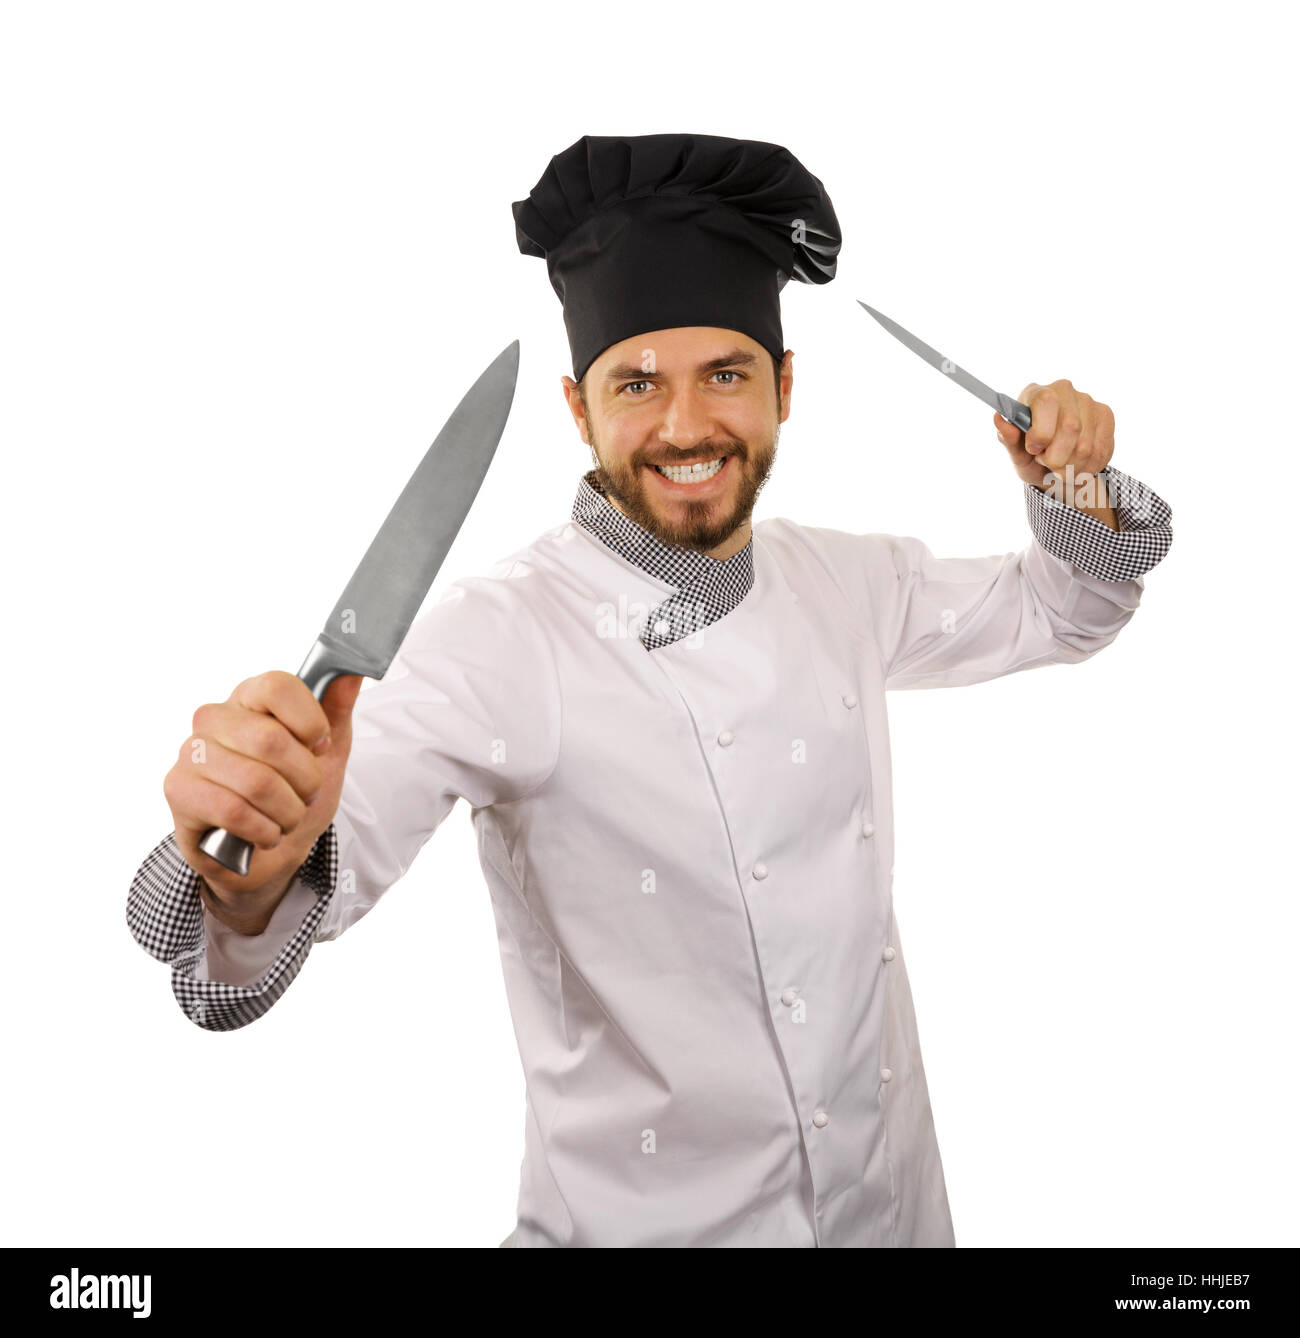 chef cook with knives in hands isolated on white background Stock Photo